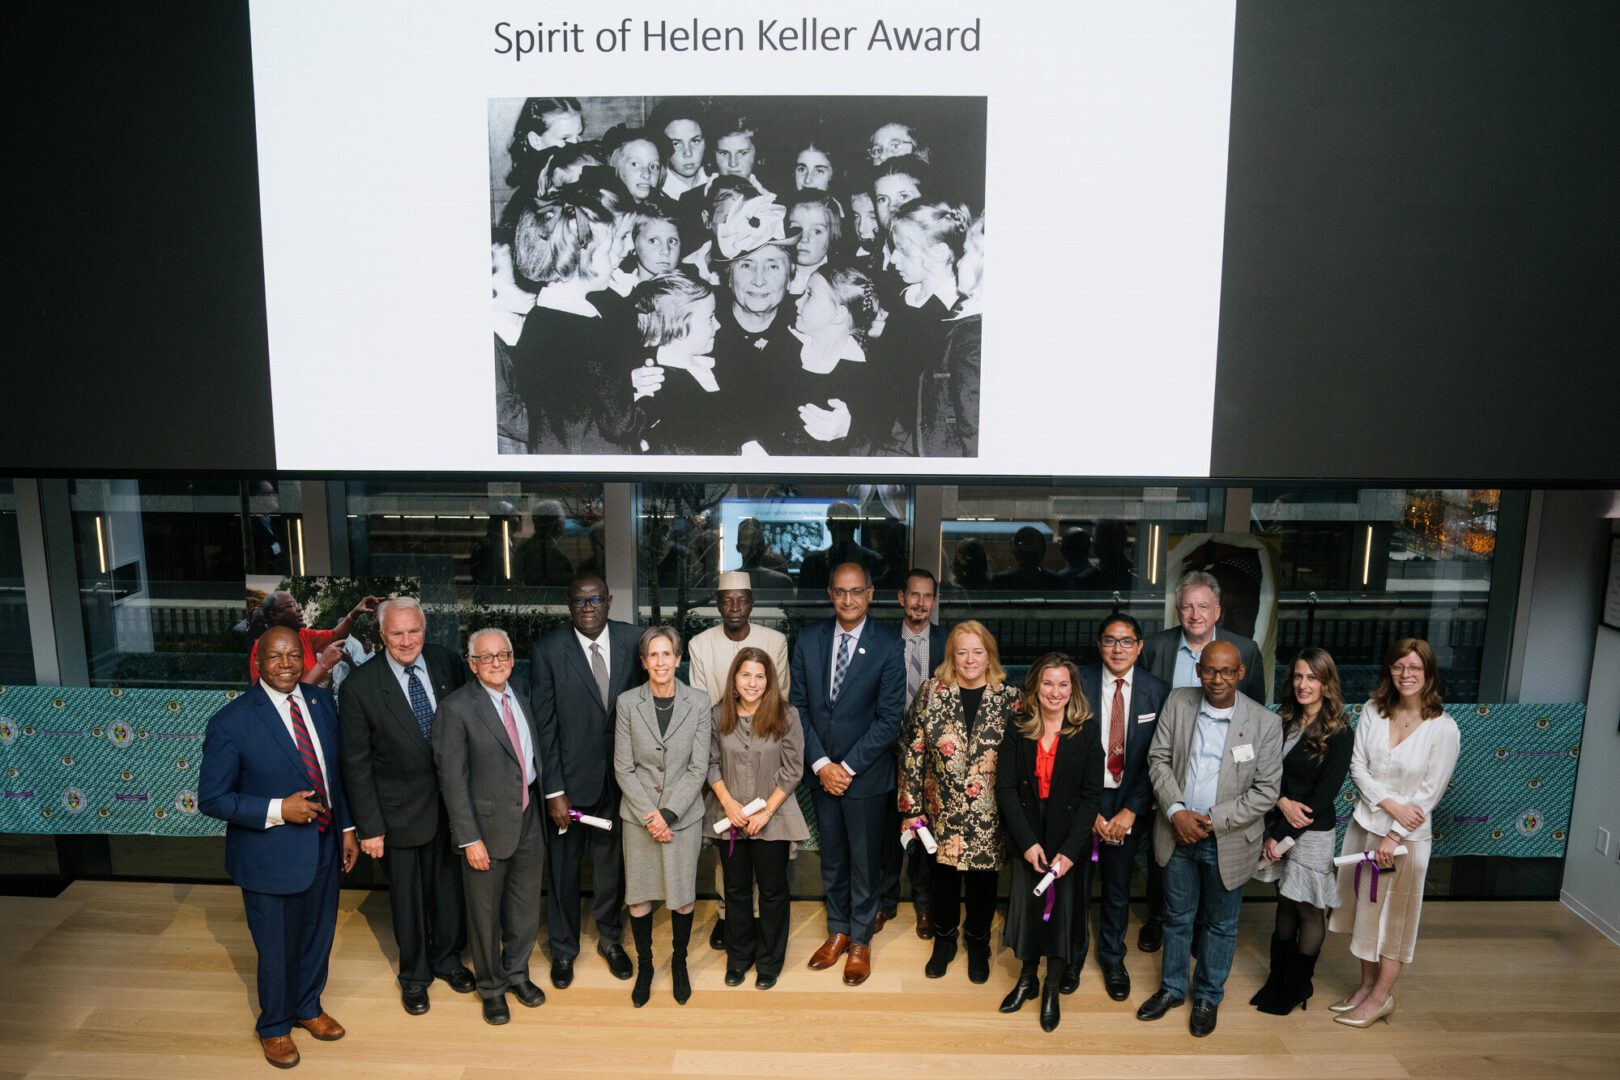 A large group of people stand under a projector screen. On the screen is a black and white photo of Helen Keller with a group of girls. Text at the top of the screen reads "Spirit of Helen Keller Award."